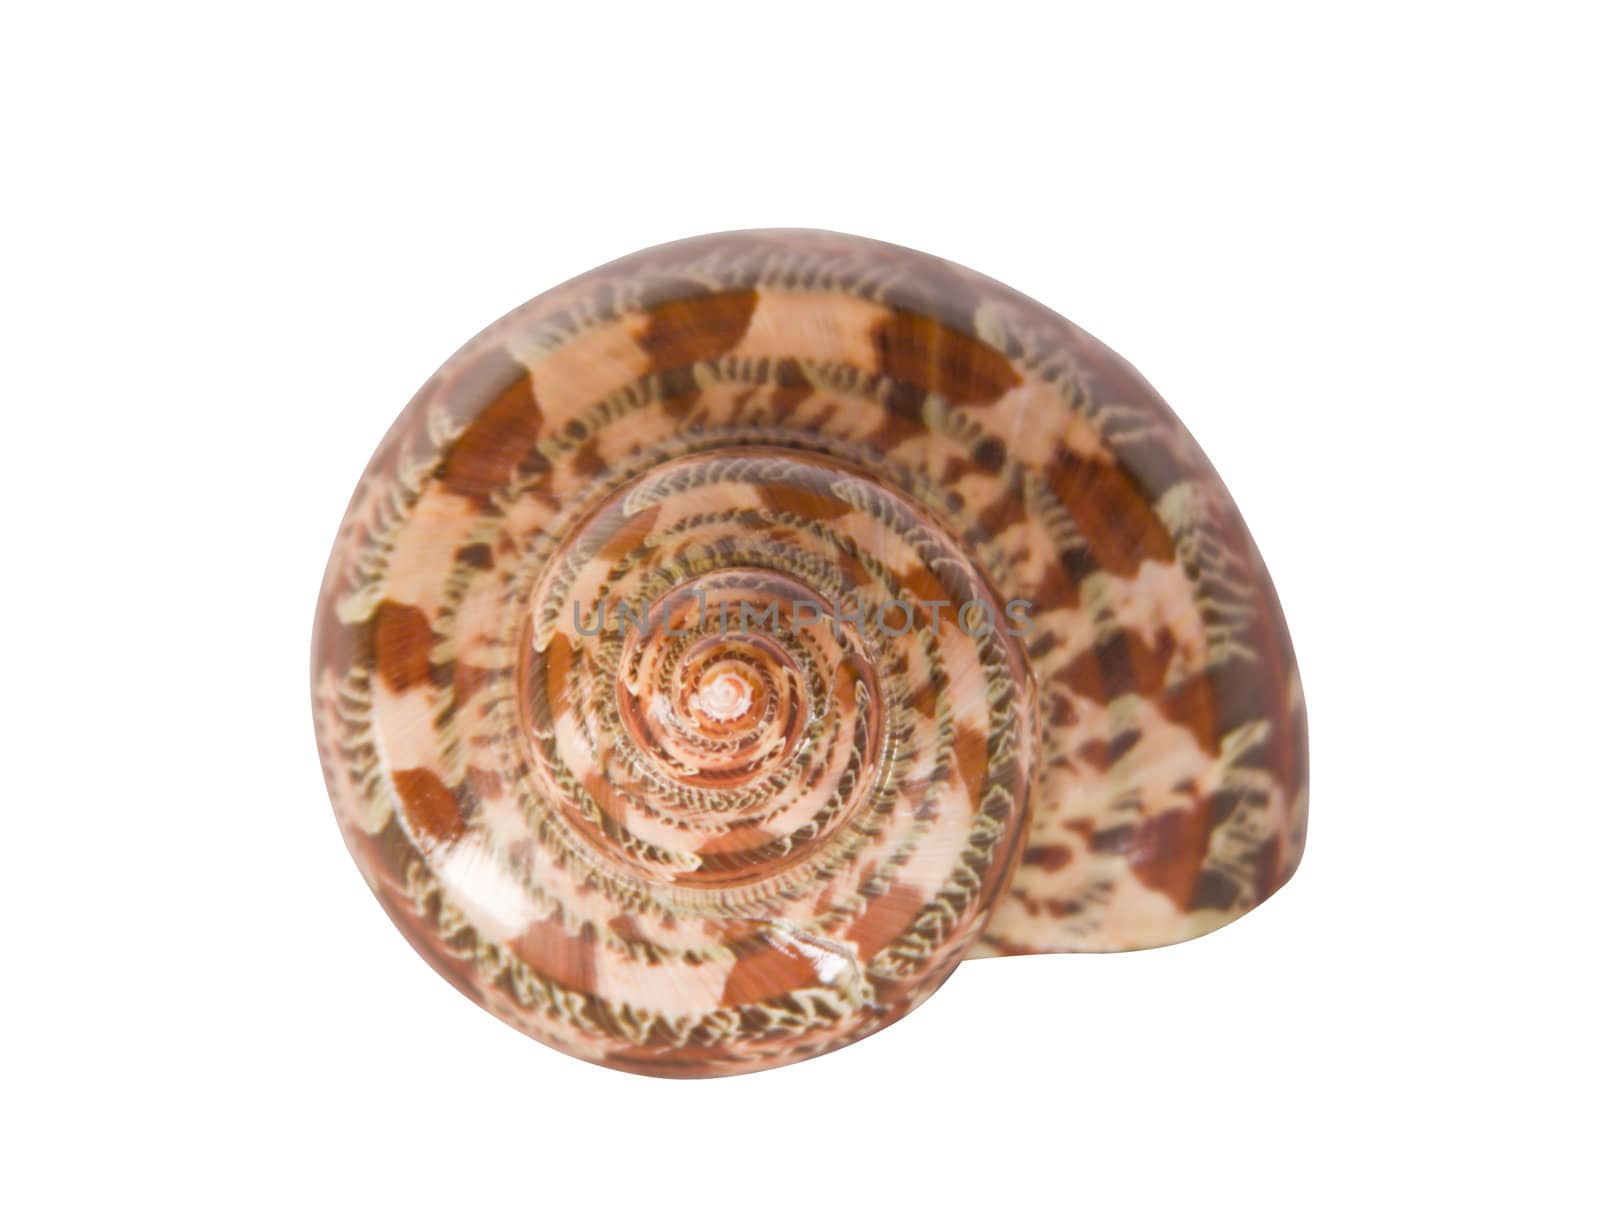 The cockle-shell is photographed close-up on the white